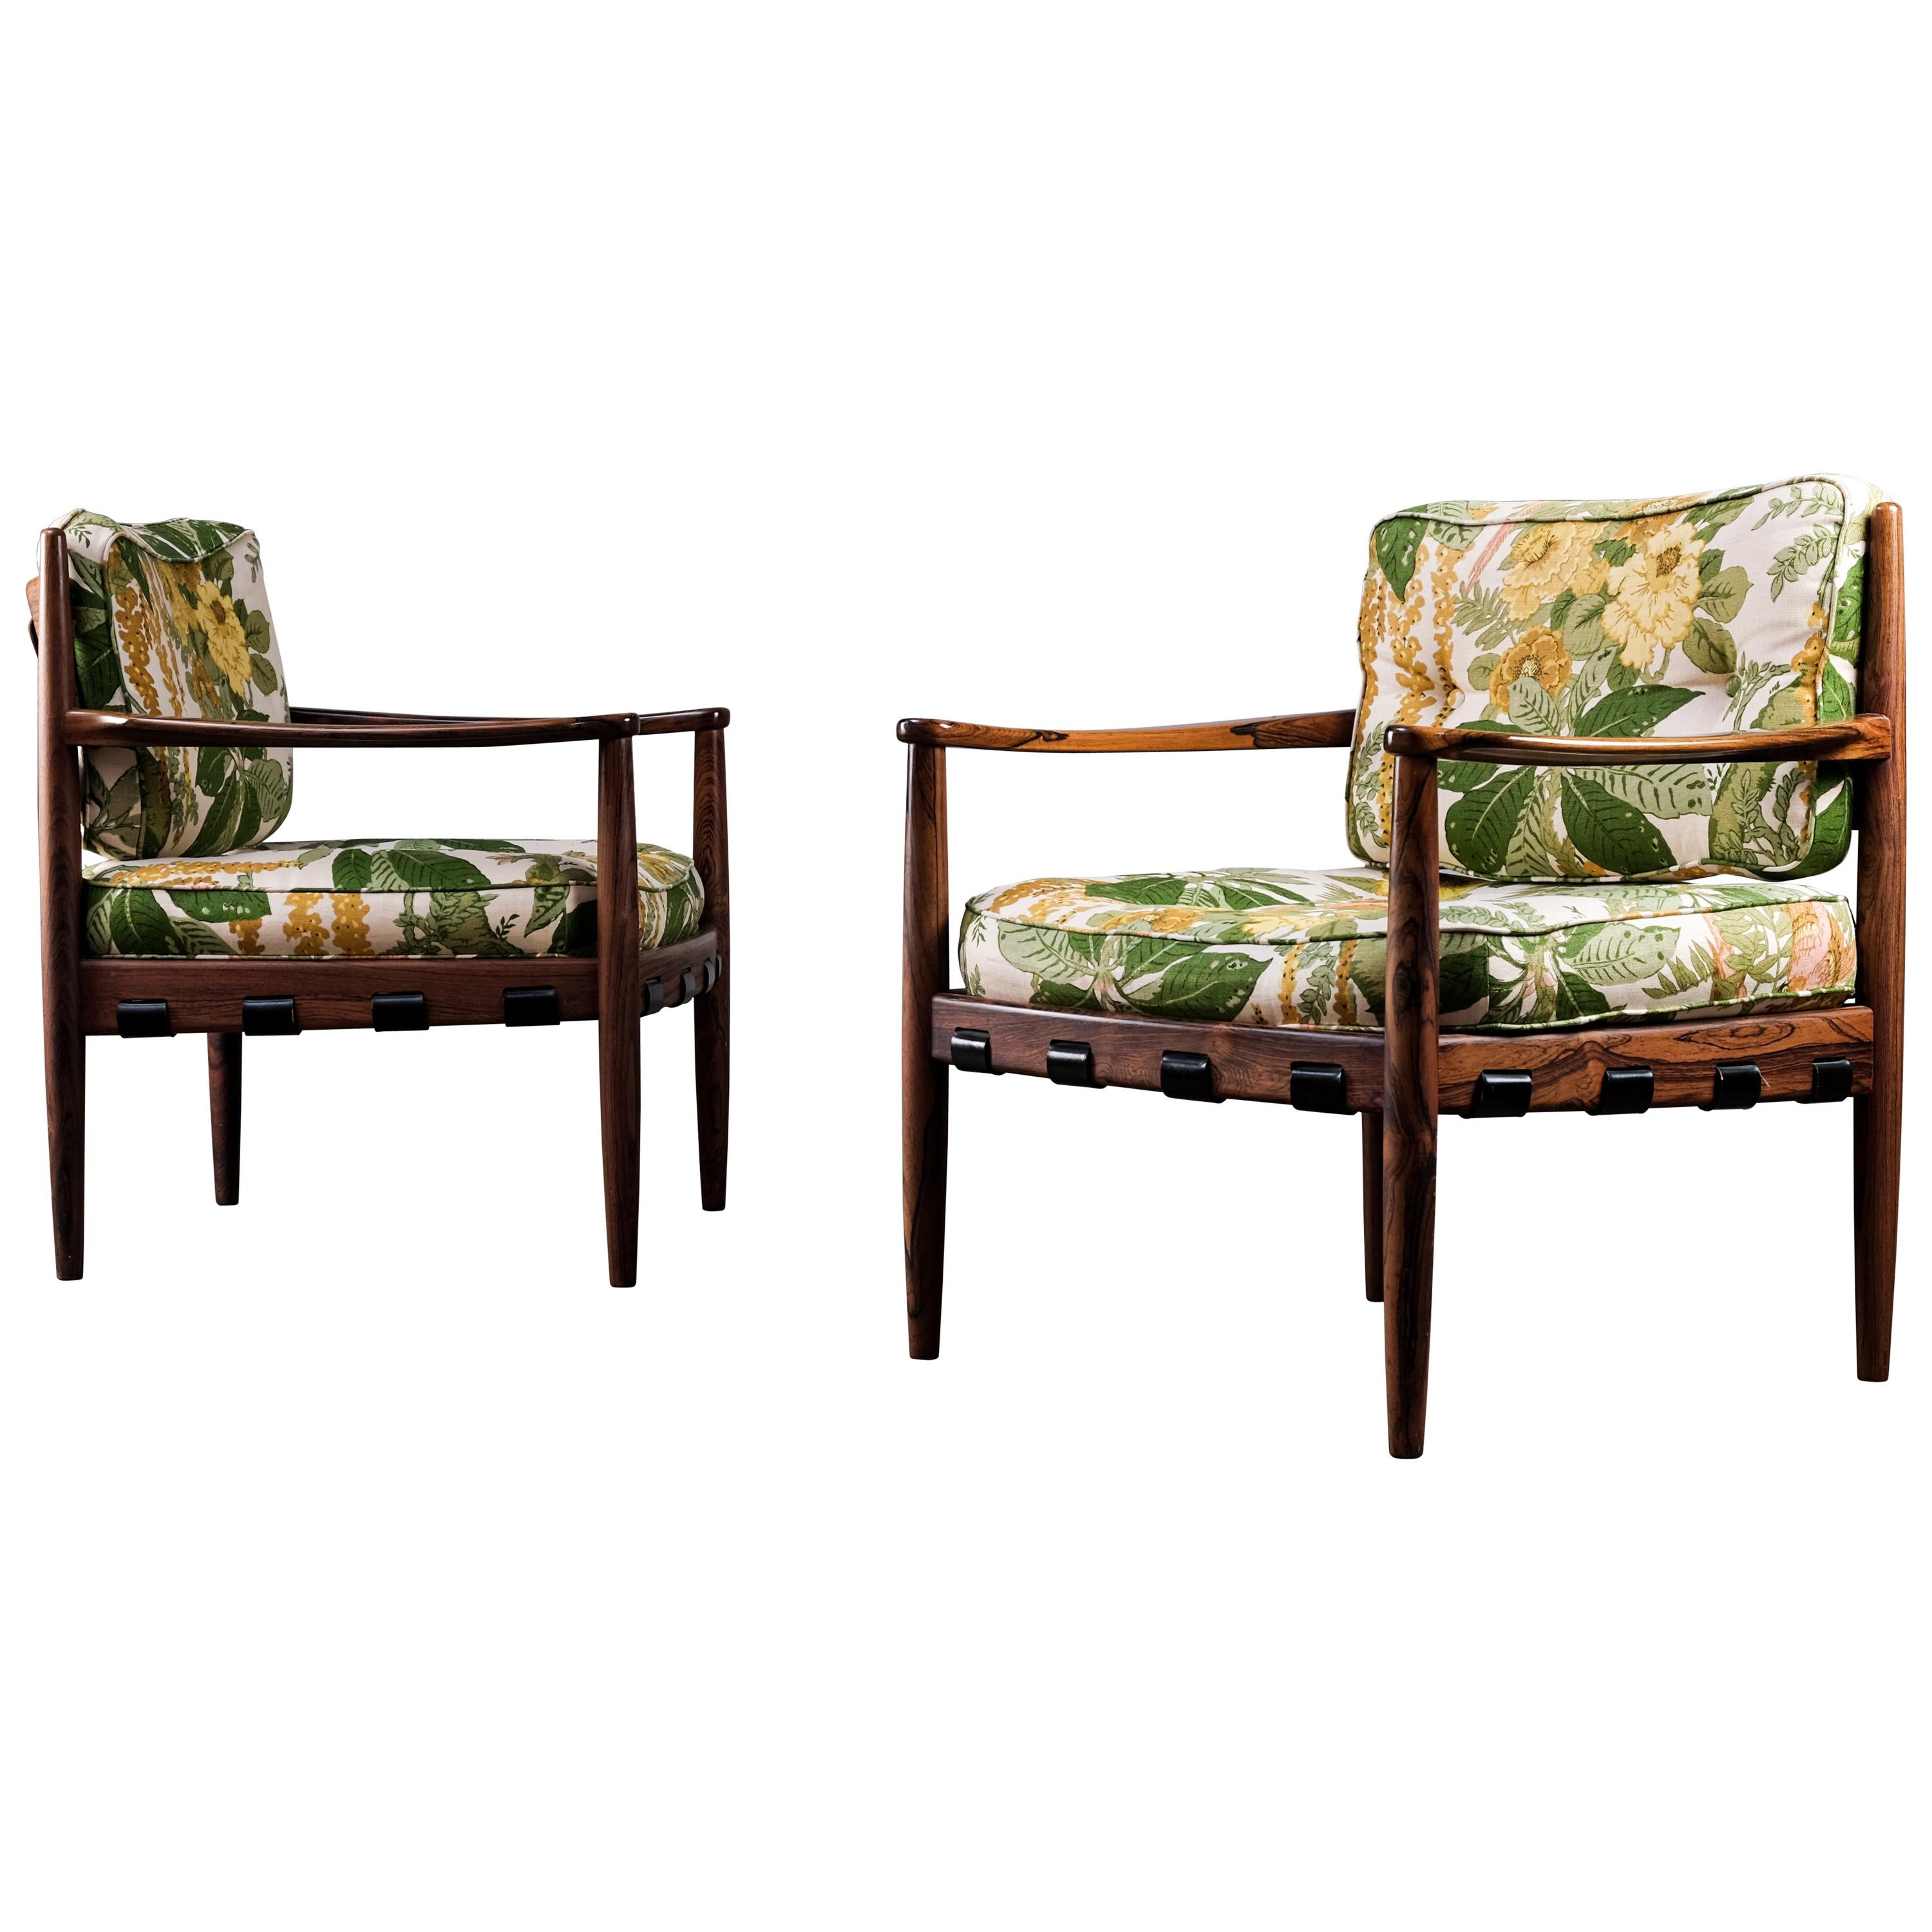 Pair of "Cadett" Easy Chairs by Eric Merthen, Sweden, 1960s